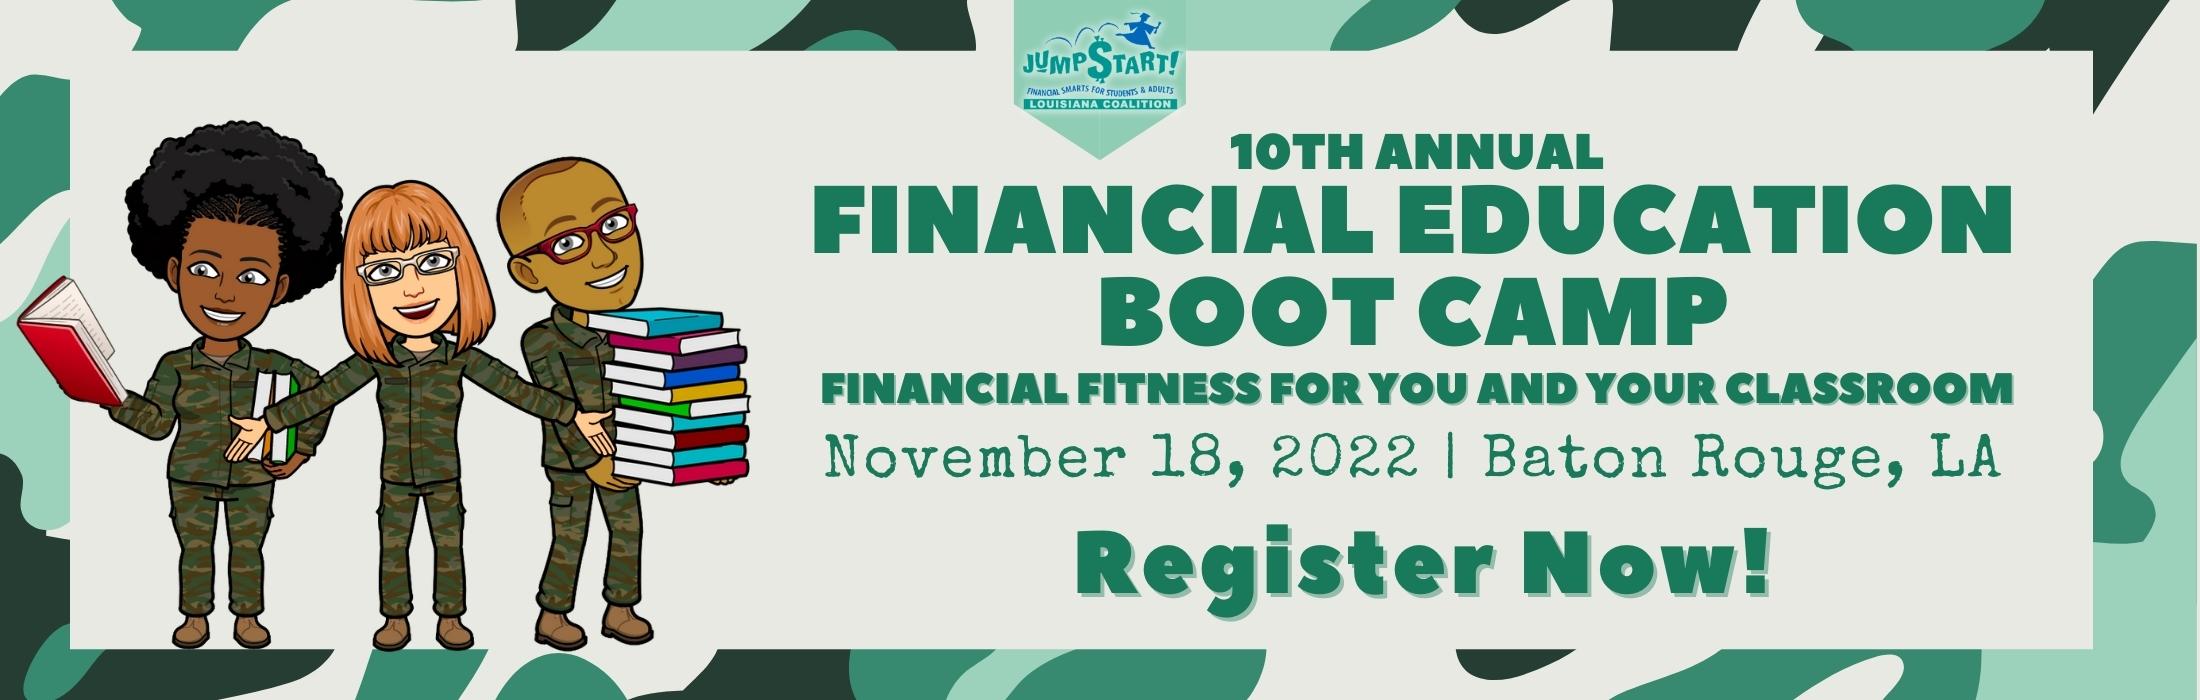 Financial Education Boot Camp 2022